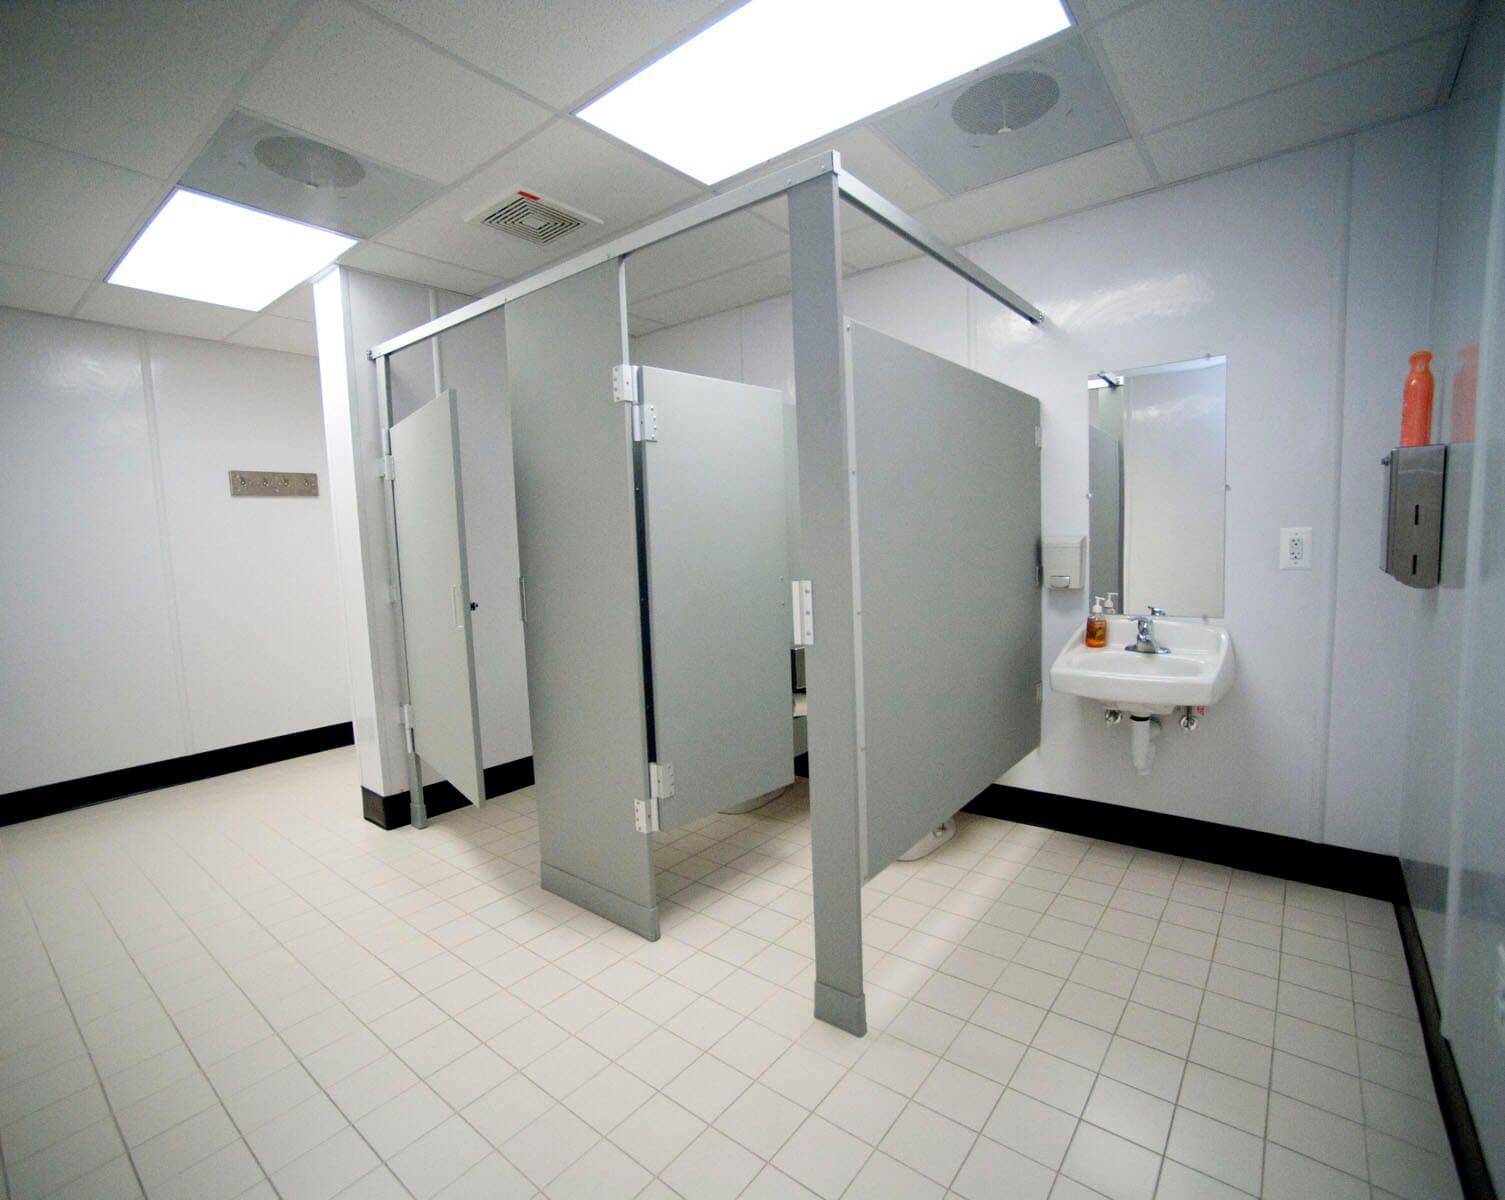 MD-State-Police-Modular-Communications-Building-Restroom